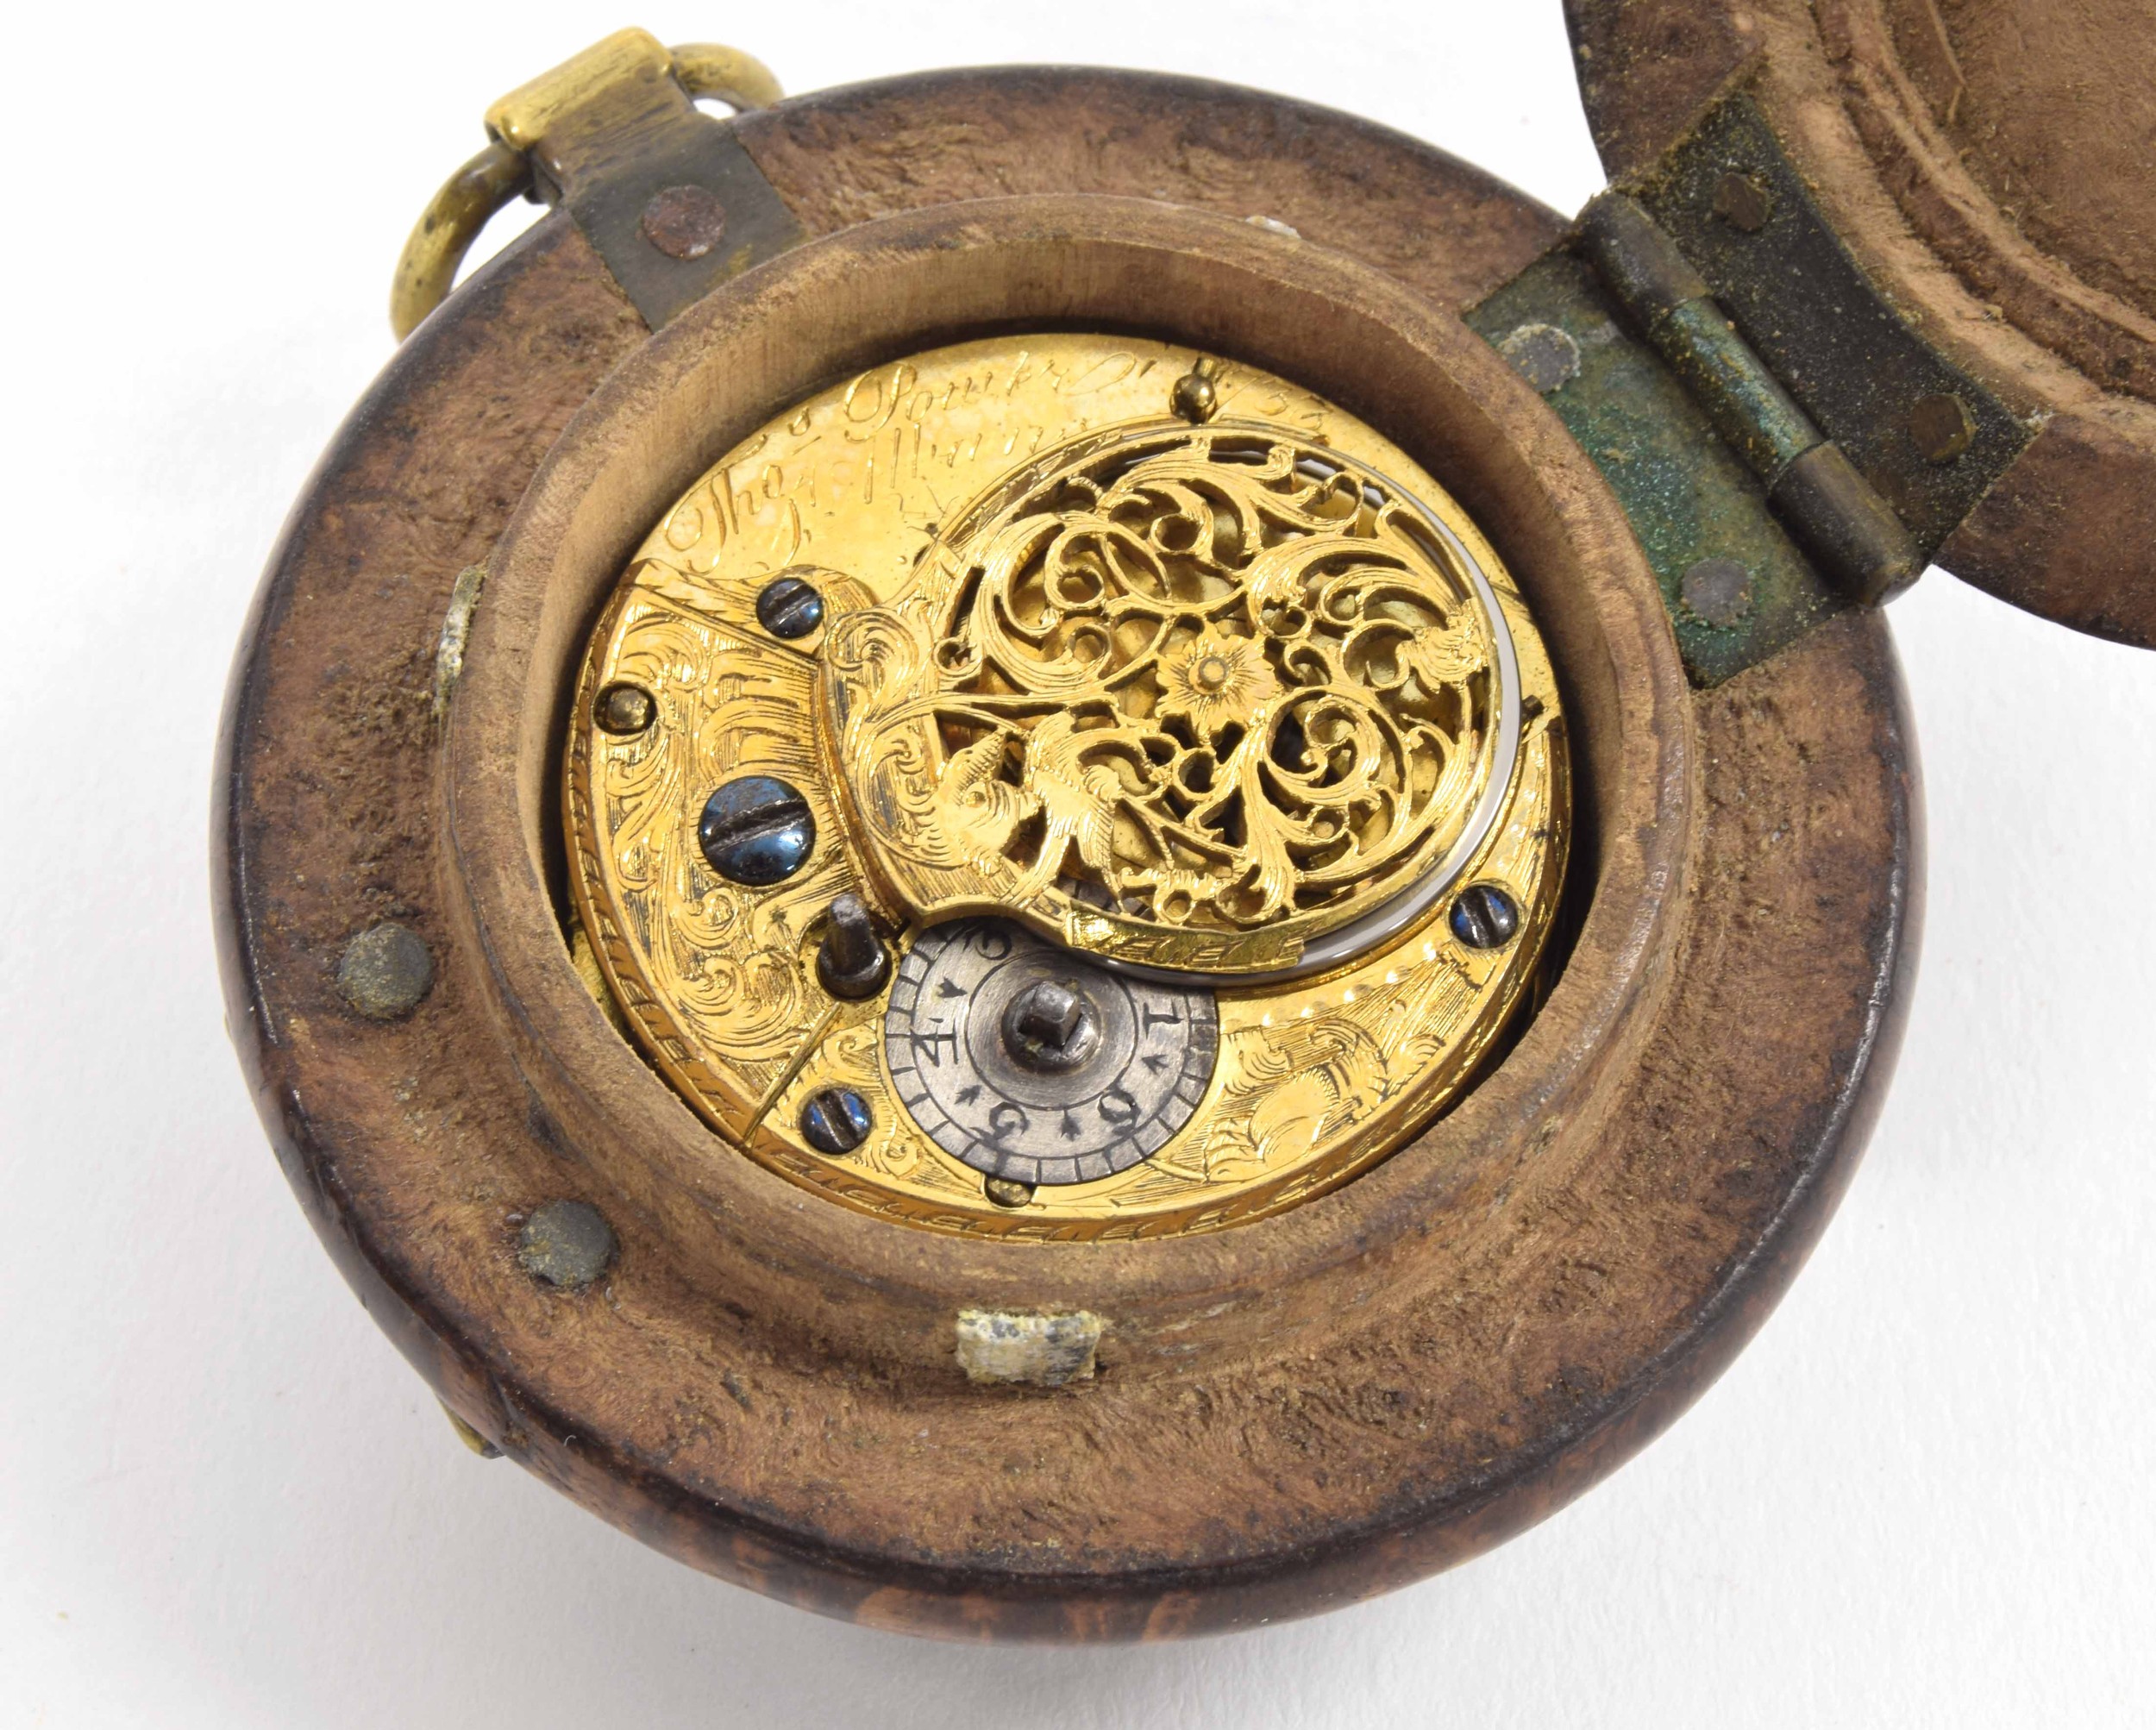 Thos. Power, St Alban - unusual English 18th century verge burr wood cased pocket watch, the fusee - Image 3 of 5